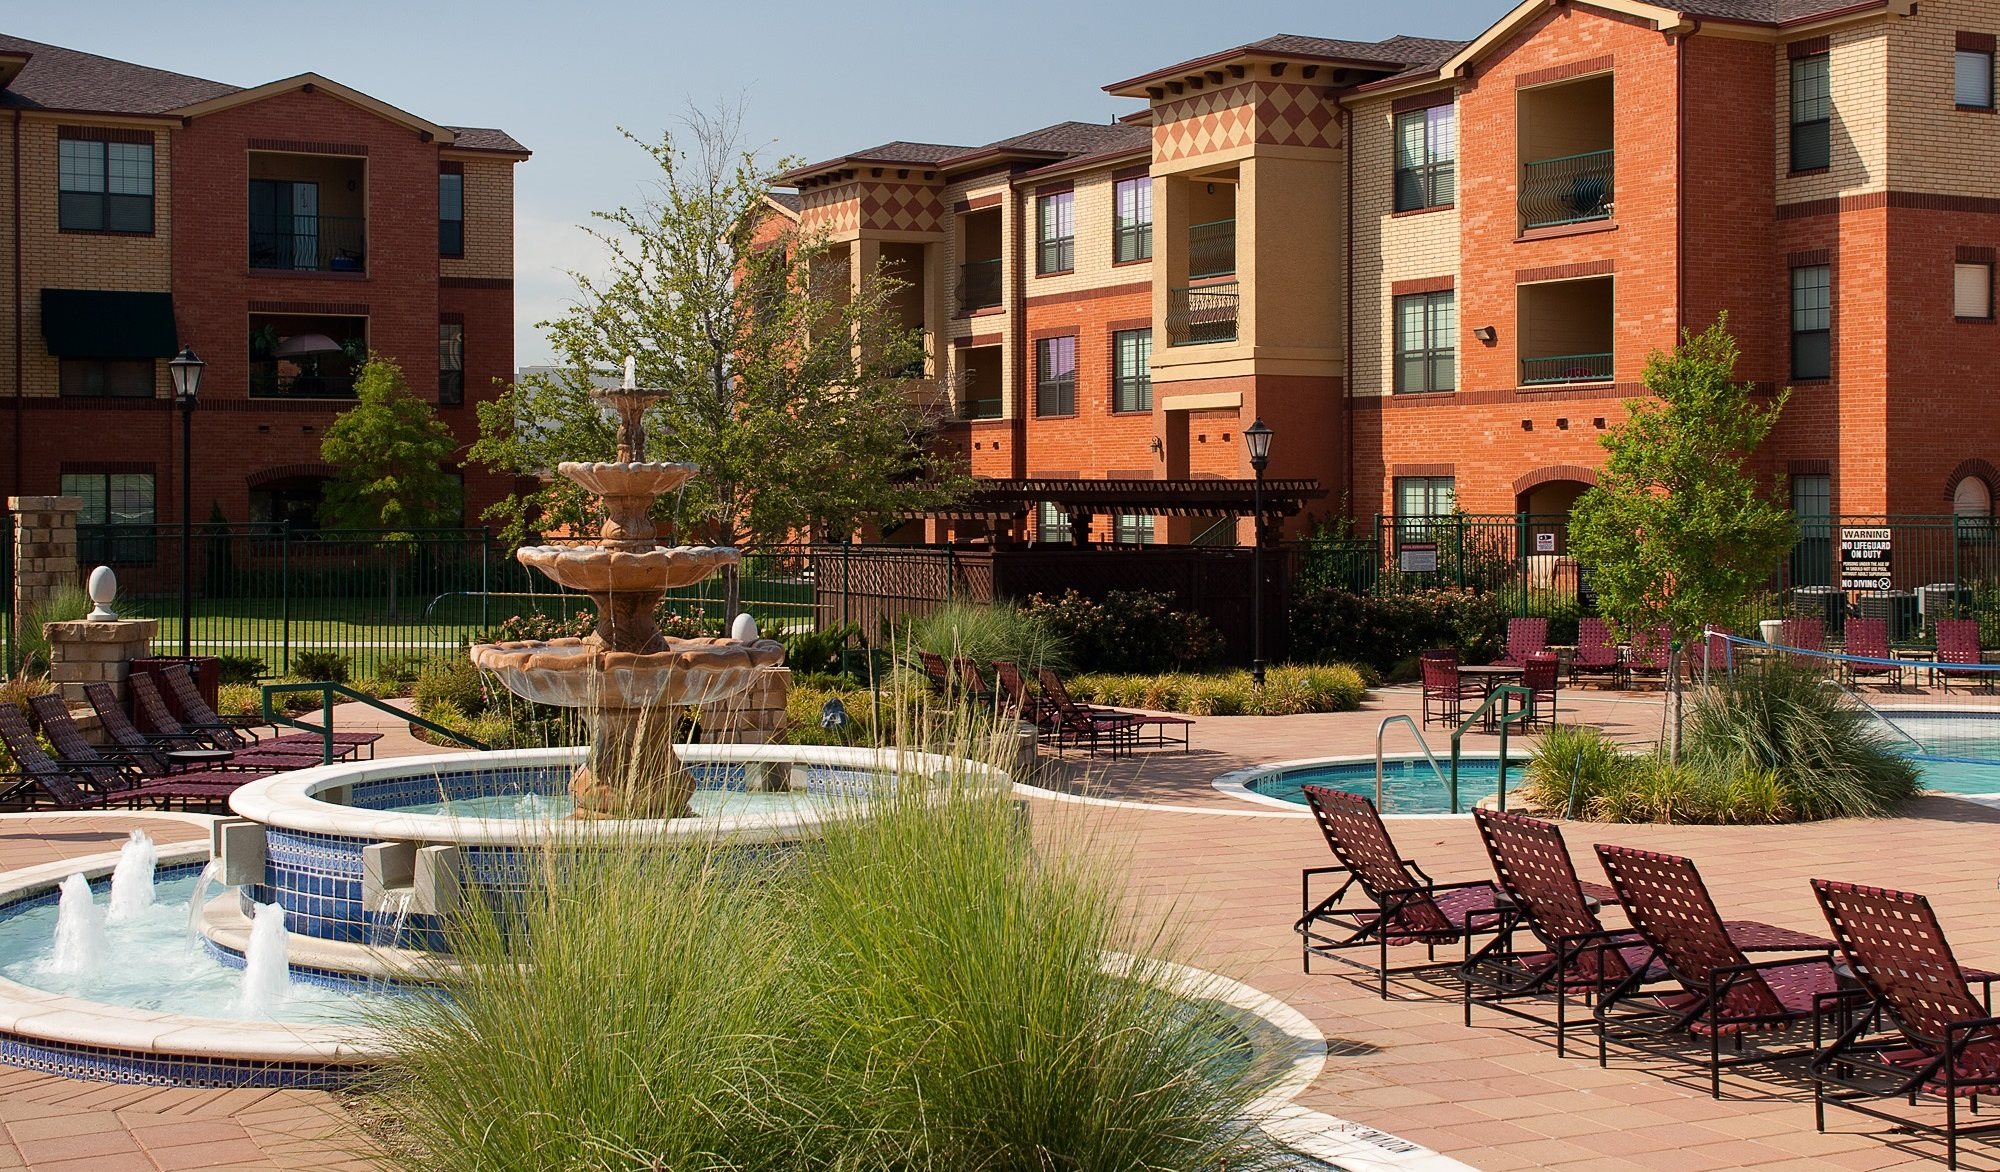 Bella Madera Apartments in Lewisville, Texas